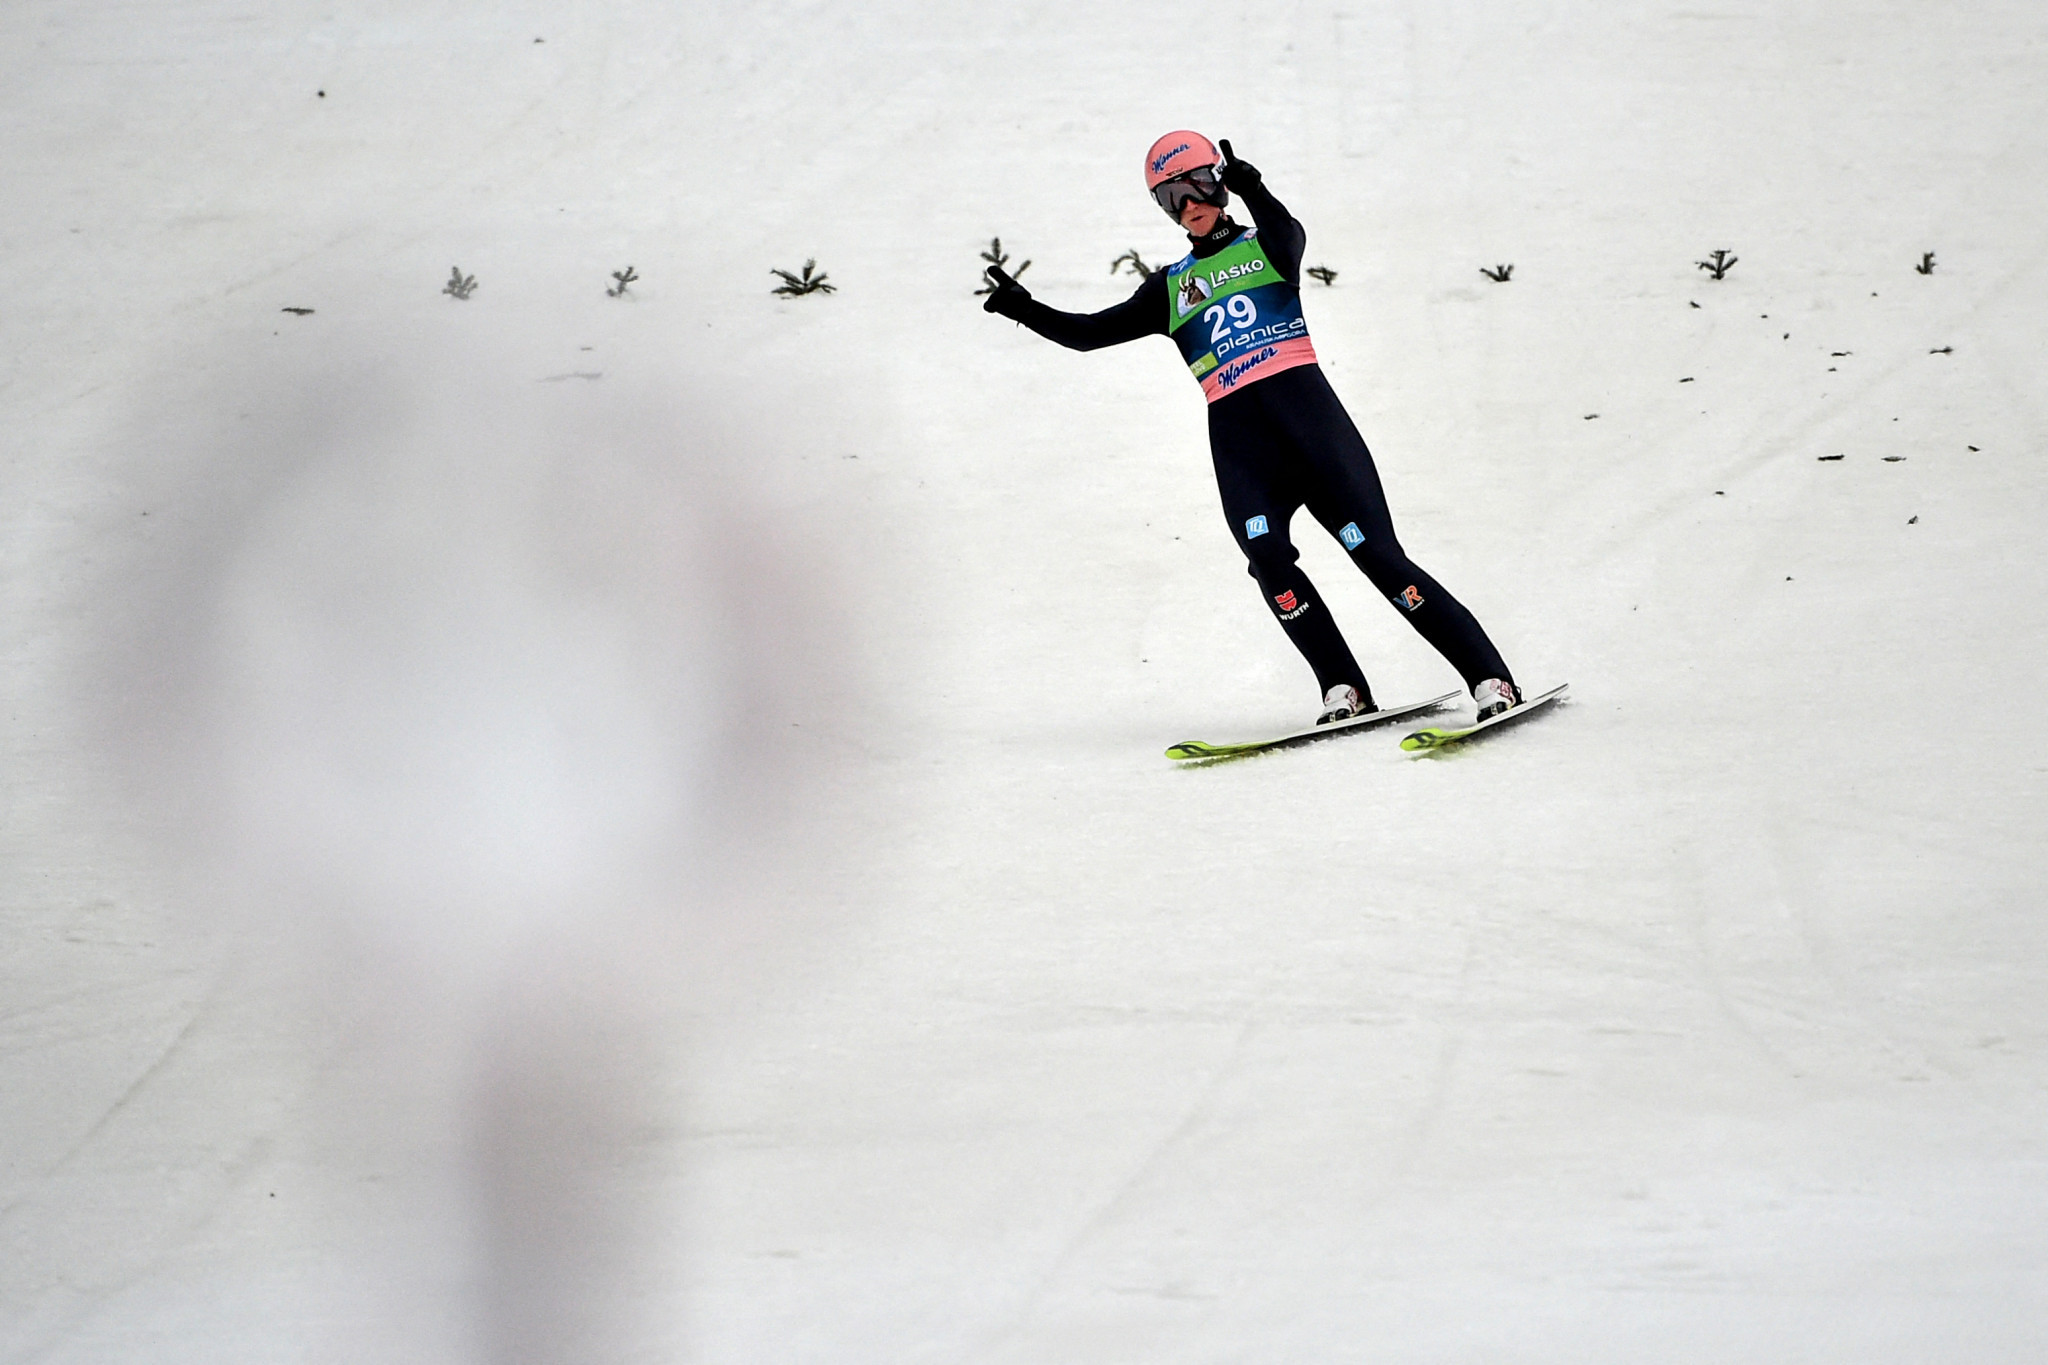 Karl Geiger is the current World Cup leader ©Getty Images